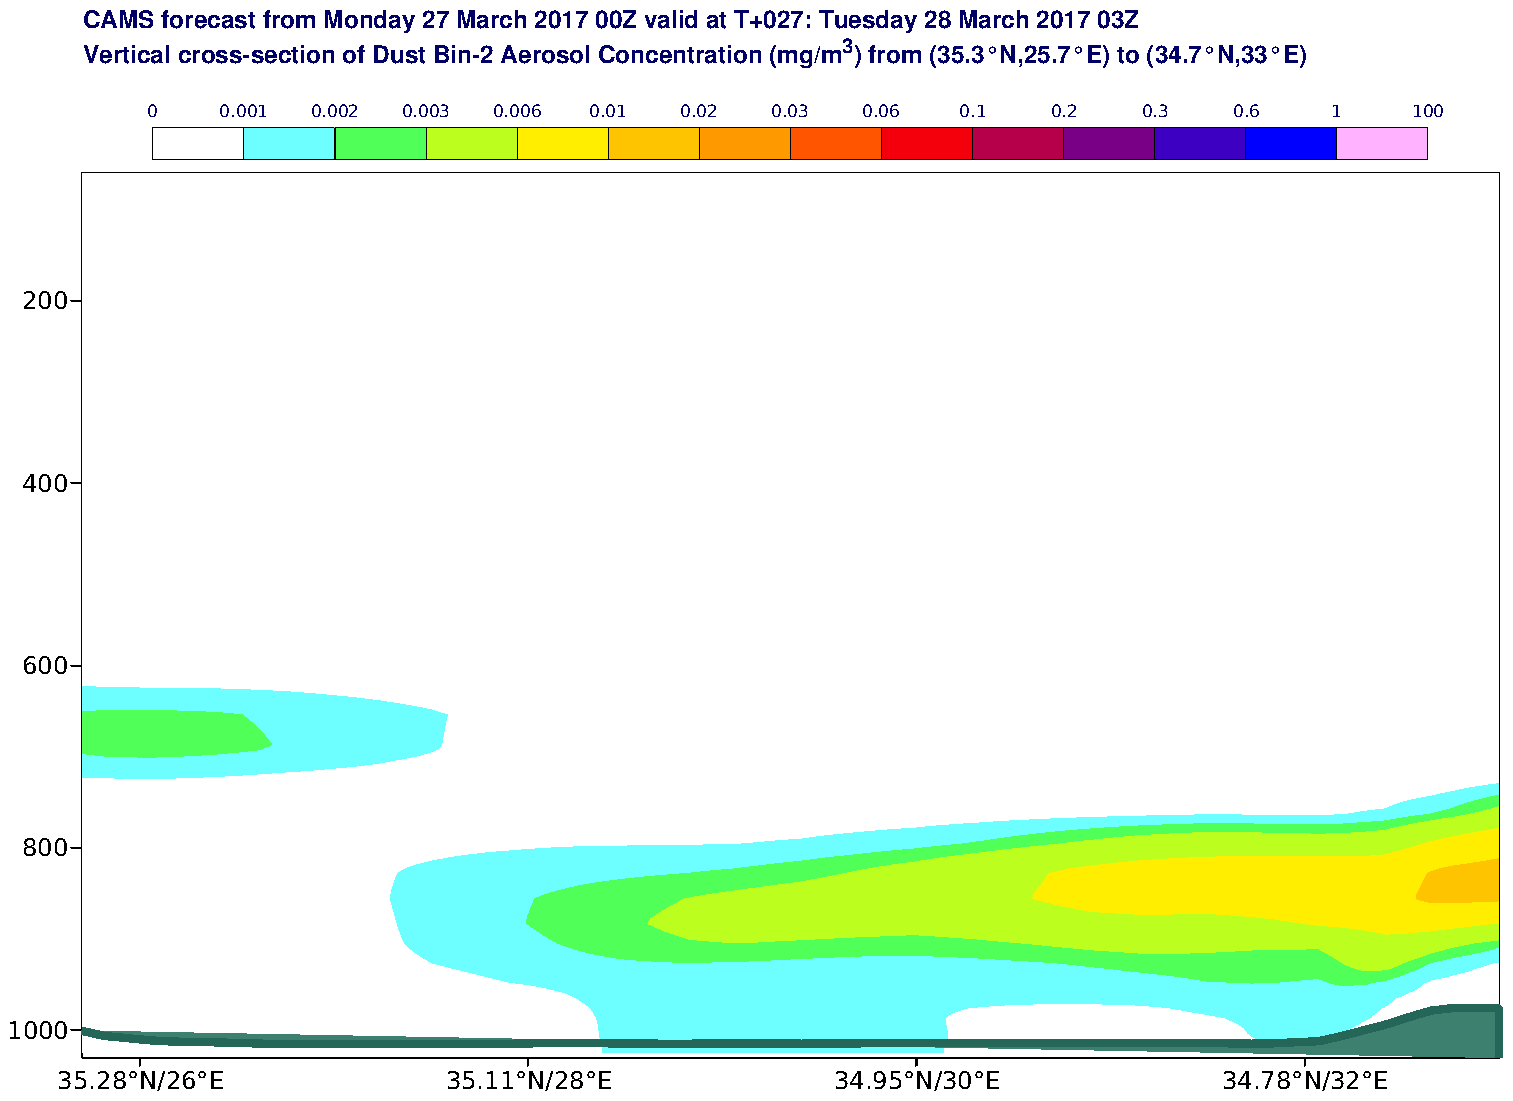 Vertical cross-section of Dust Bin-2 Aerosol Concentration (mg/m3) valid at T27 - 2017-03-28 03:00